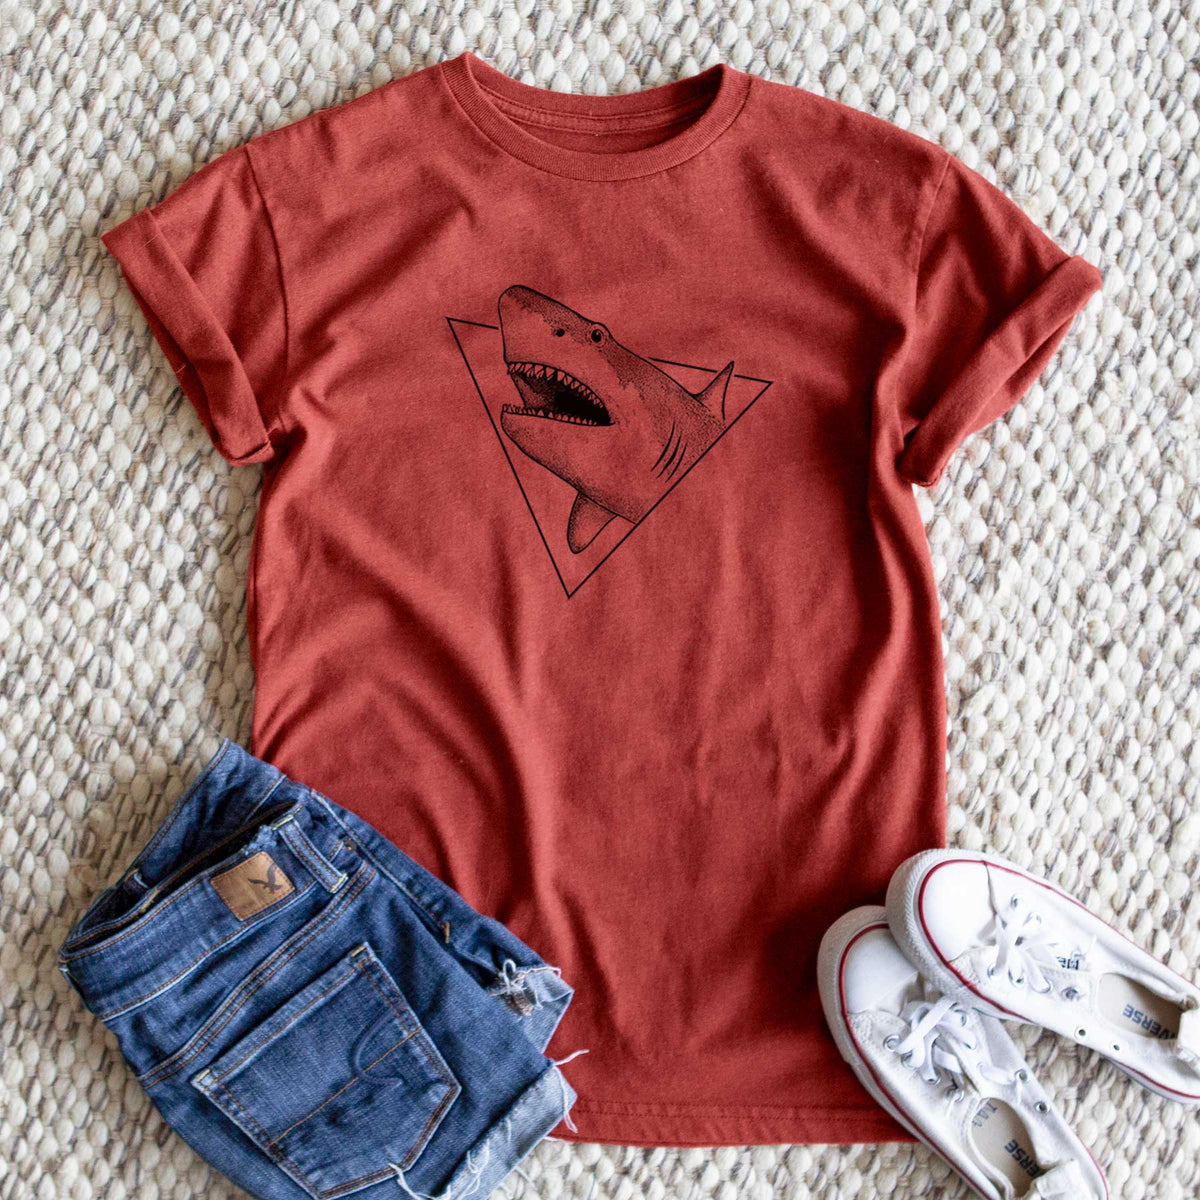 Great White Shark Triangle - Unisex Recycled Eco Tee  - CLOSEOUT - FINAL SALE